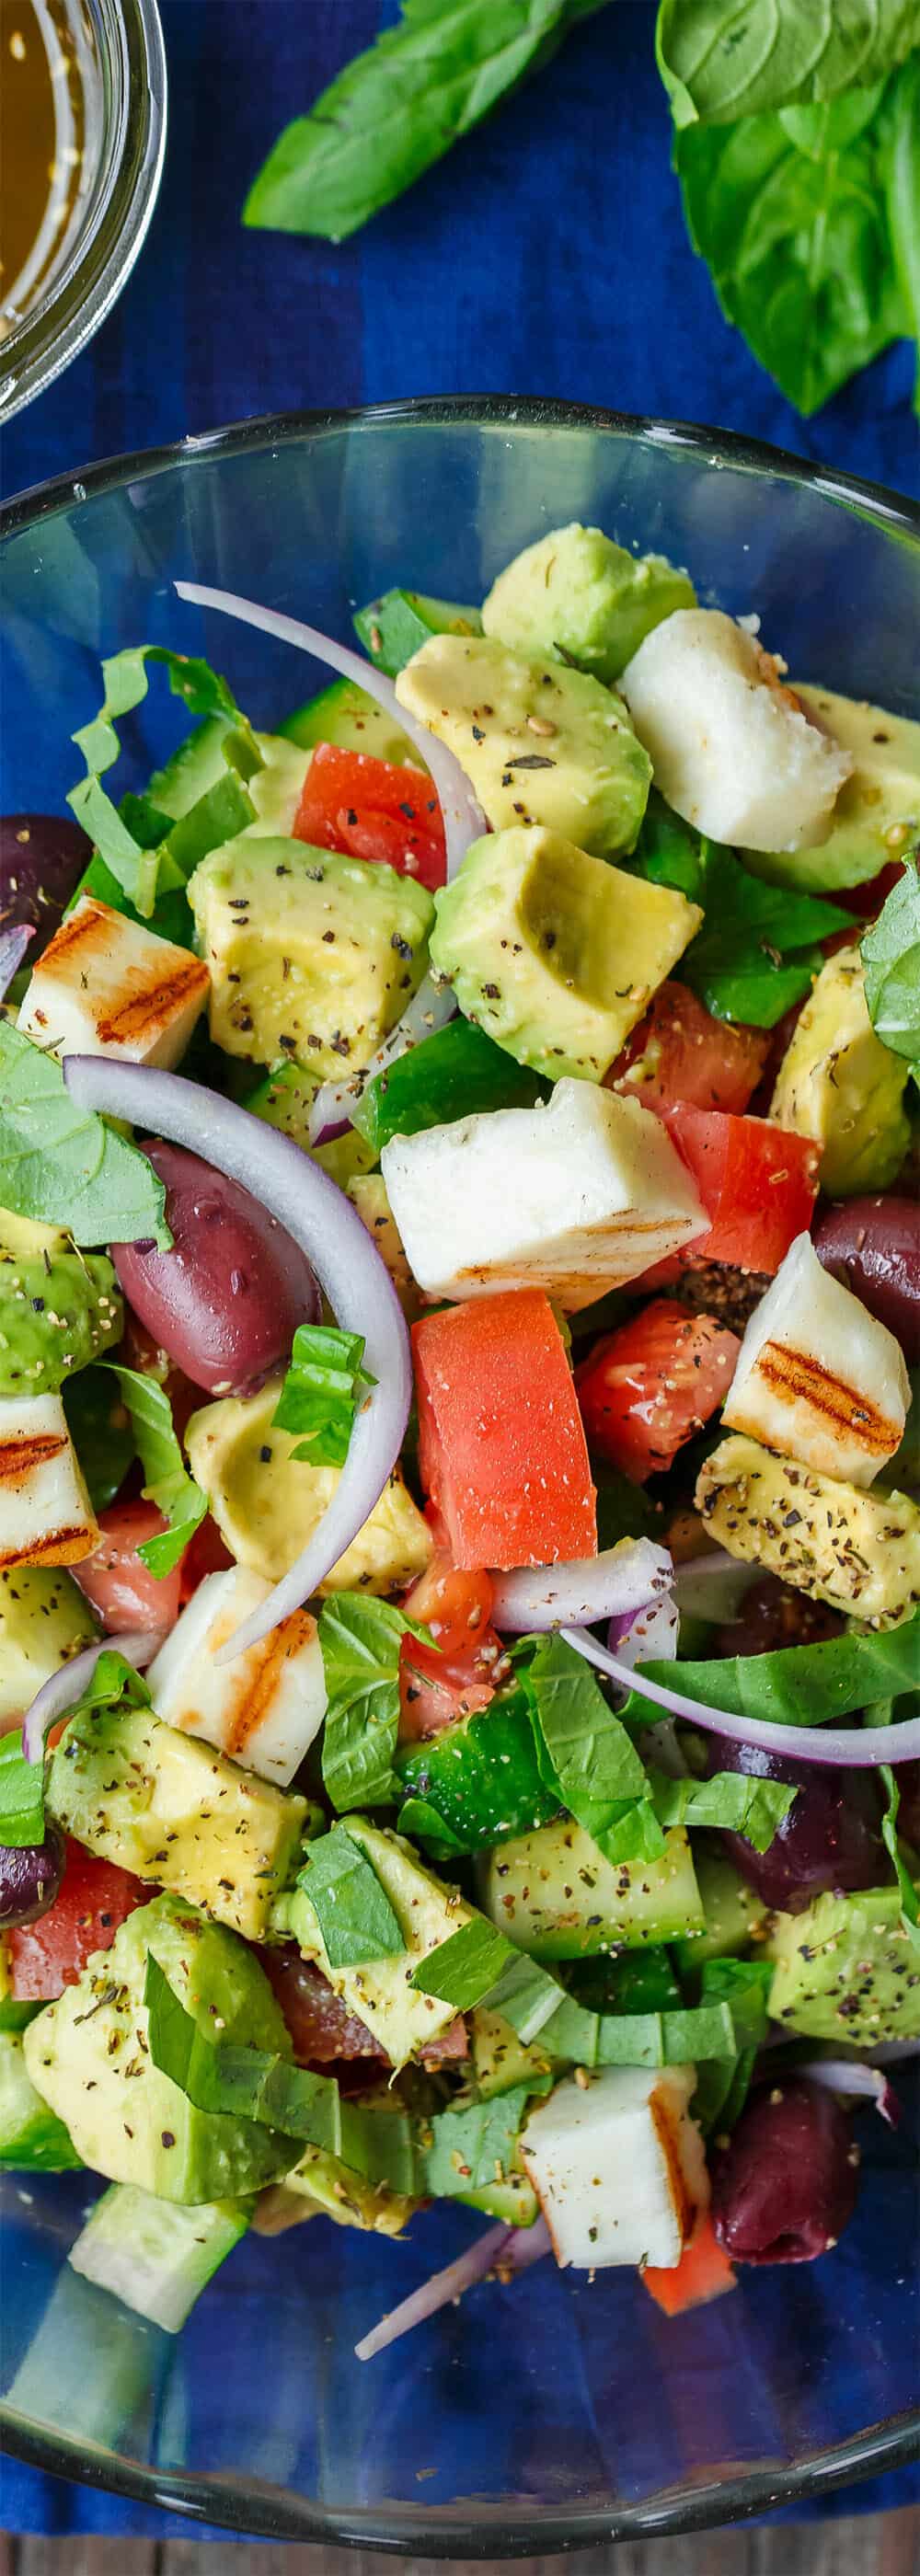 Simple Mediterranean Avocado Salad | The Mediterranean Dish. The BEST avocado salad, prepared Mediterranean style with tomatoes, cucumbers and a the perfect garlic vinaigrette! Use grilled halloumi cheese for croutons, or leave them out for a vegan option. #avocado #avocadosalad #mediterraneandiet #mediterraneanfood #salad #avocados #vegetarianrecipes #glutenfree